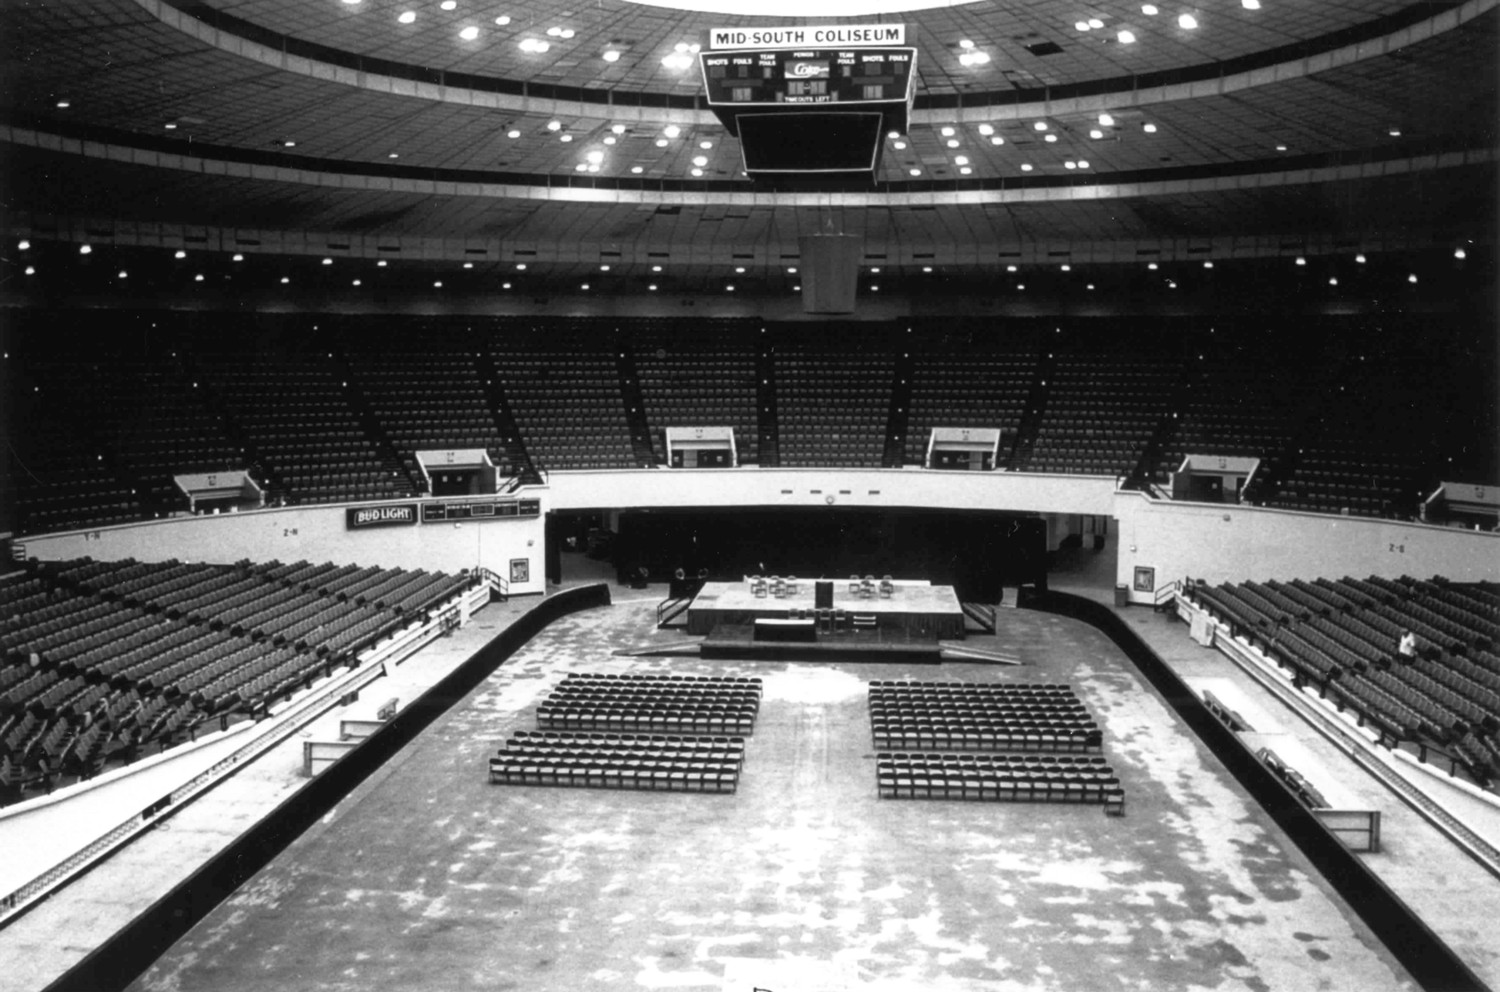 Mid-South Coliseum, Memphis Tennessee Arena, looking east (2000)